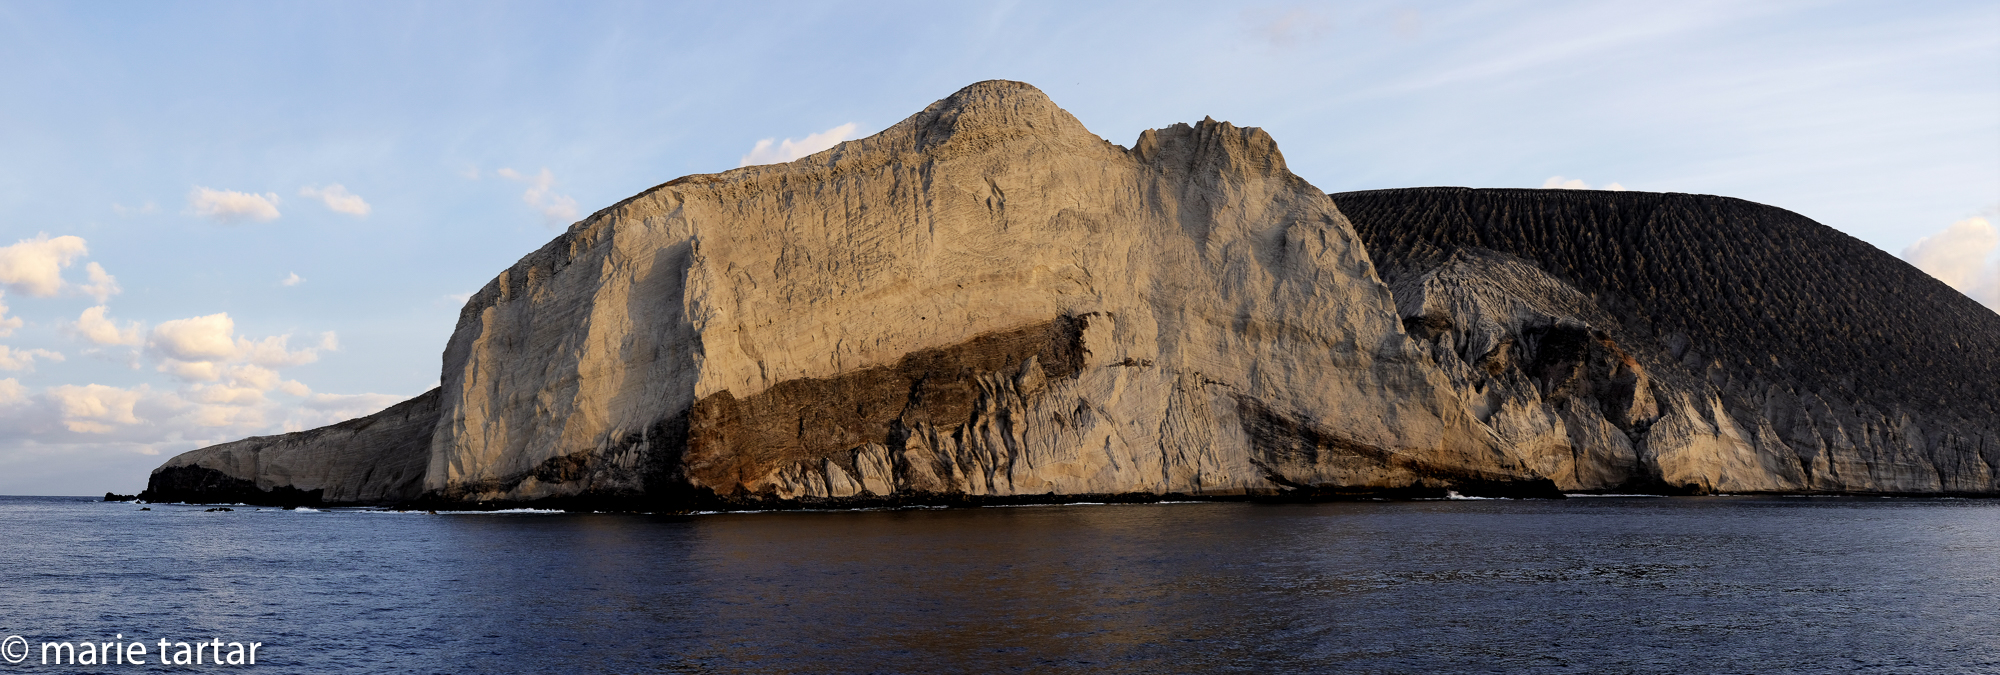 Socorro consists of 4 barren volcanic islands with their own ecosystem, including sculptural Isla San Bendicto